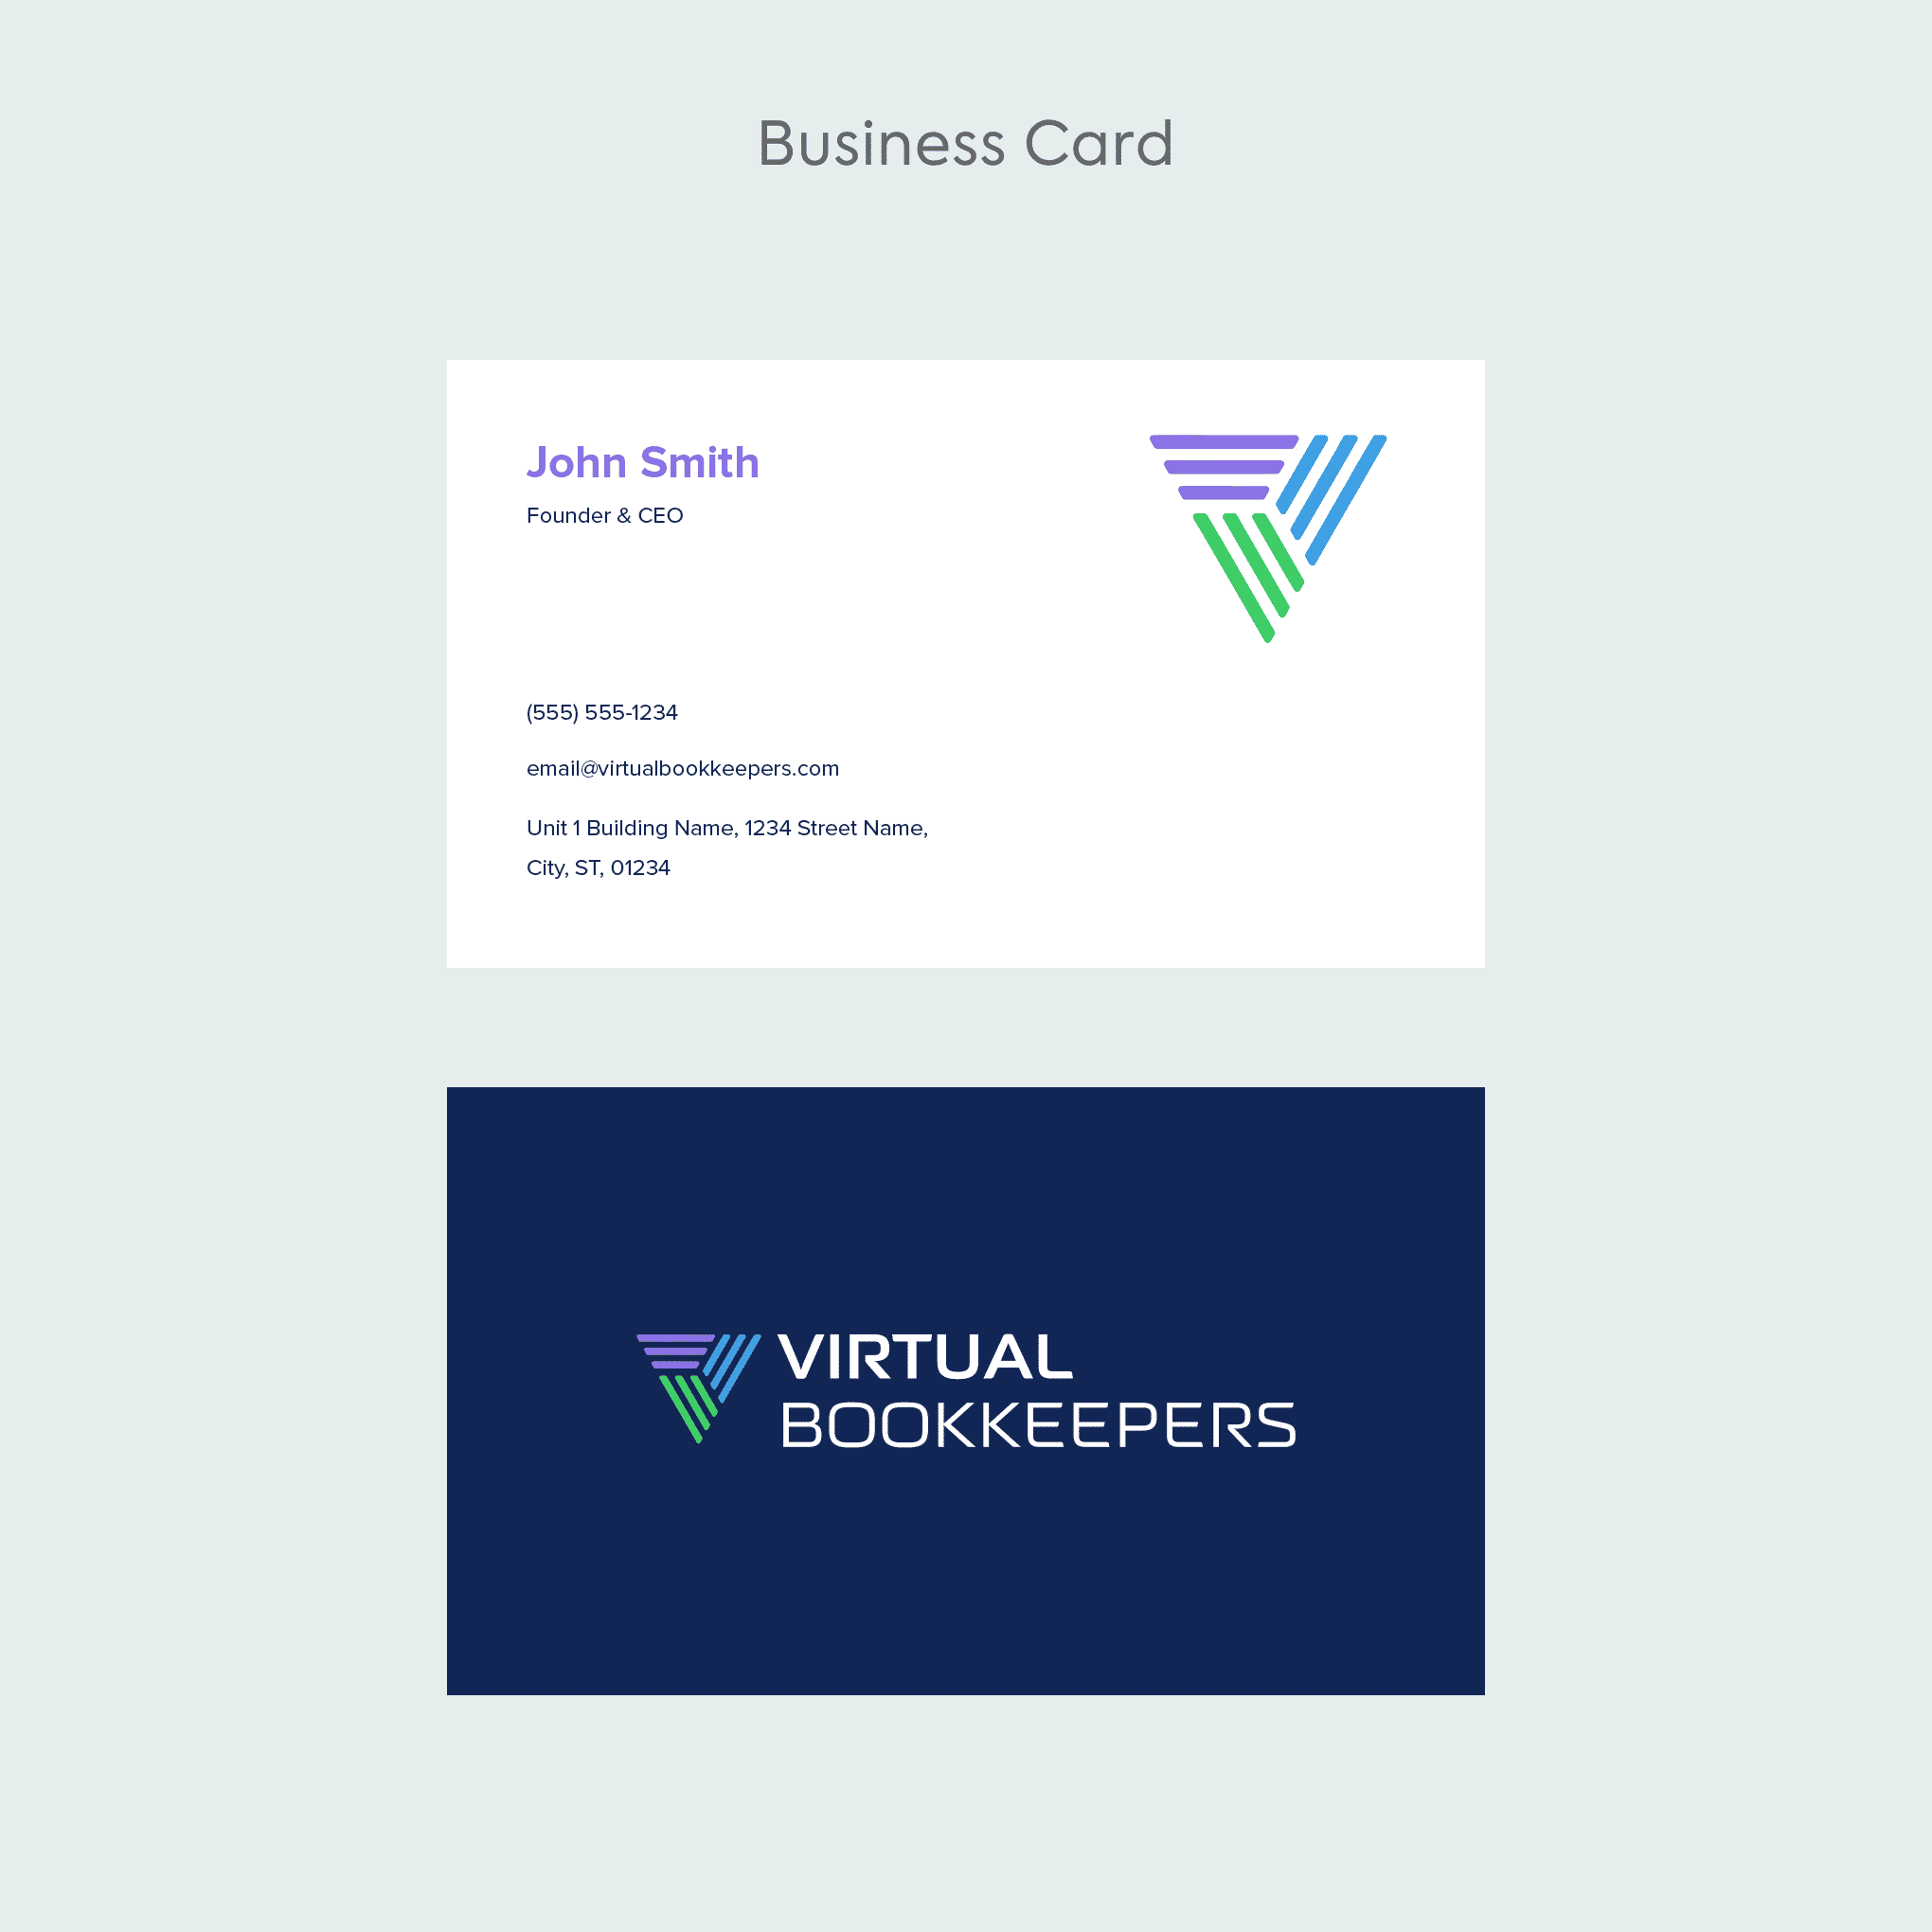 04 - Business Card Template (9)